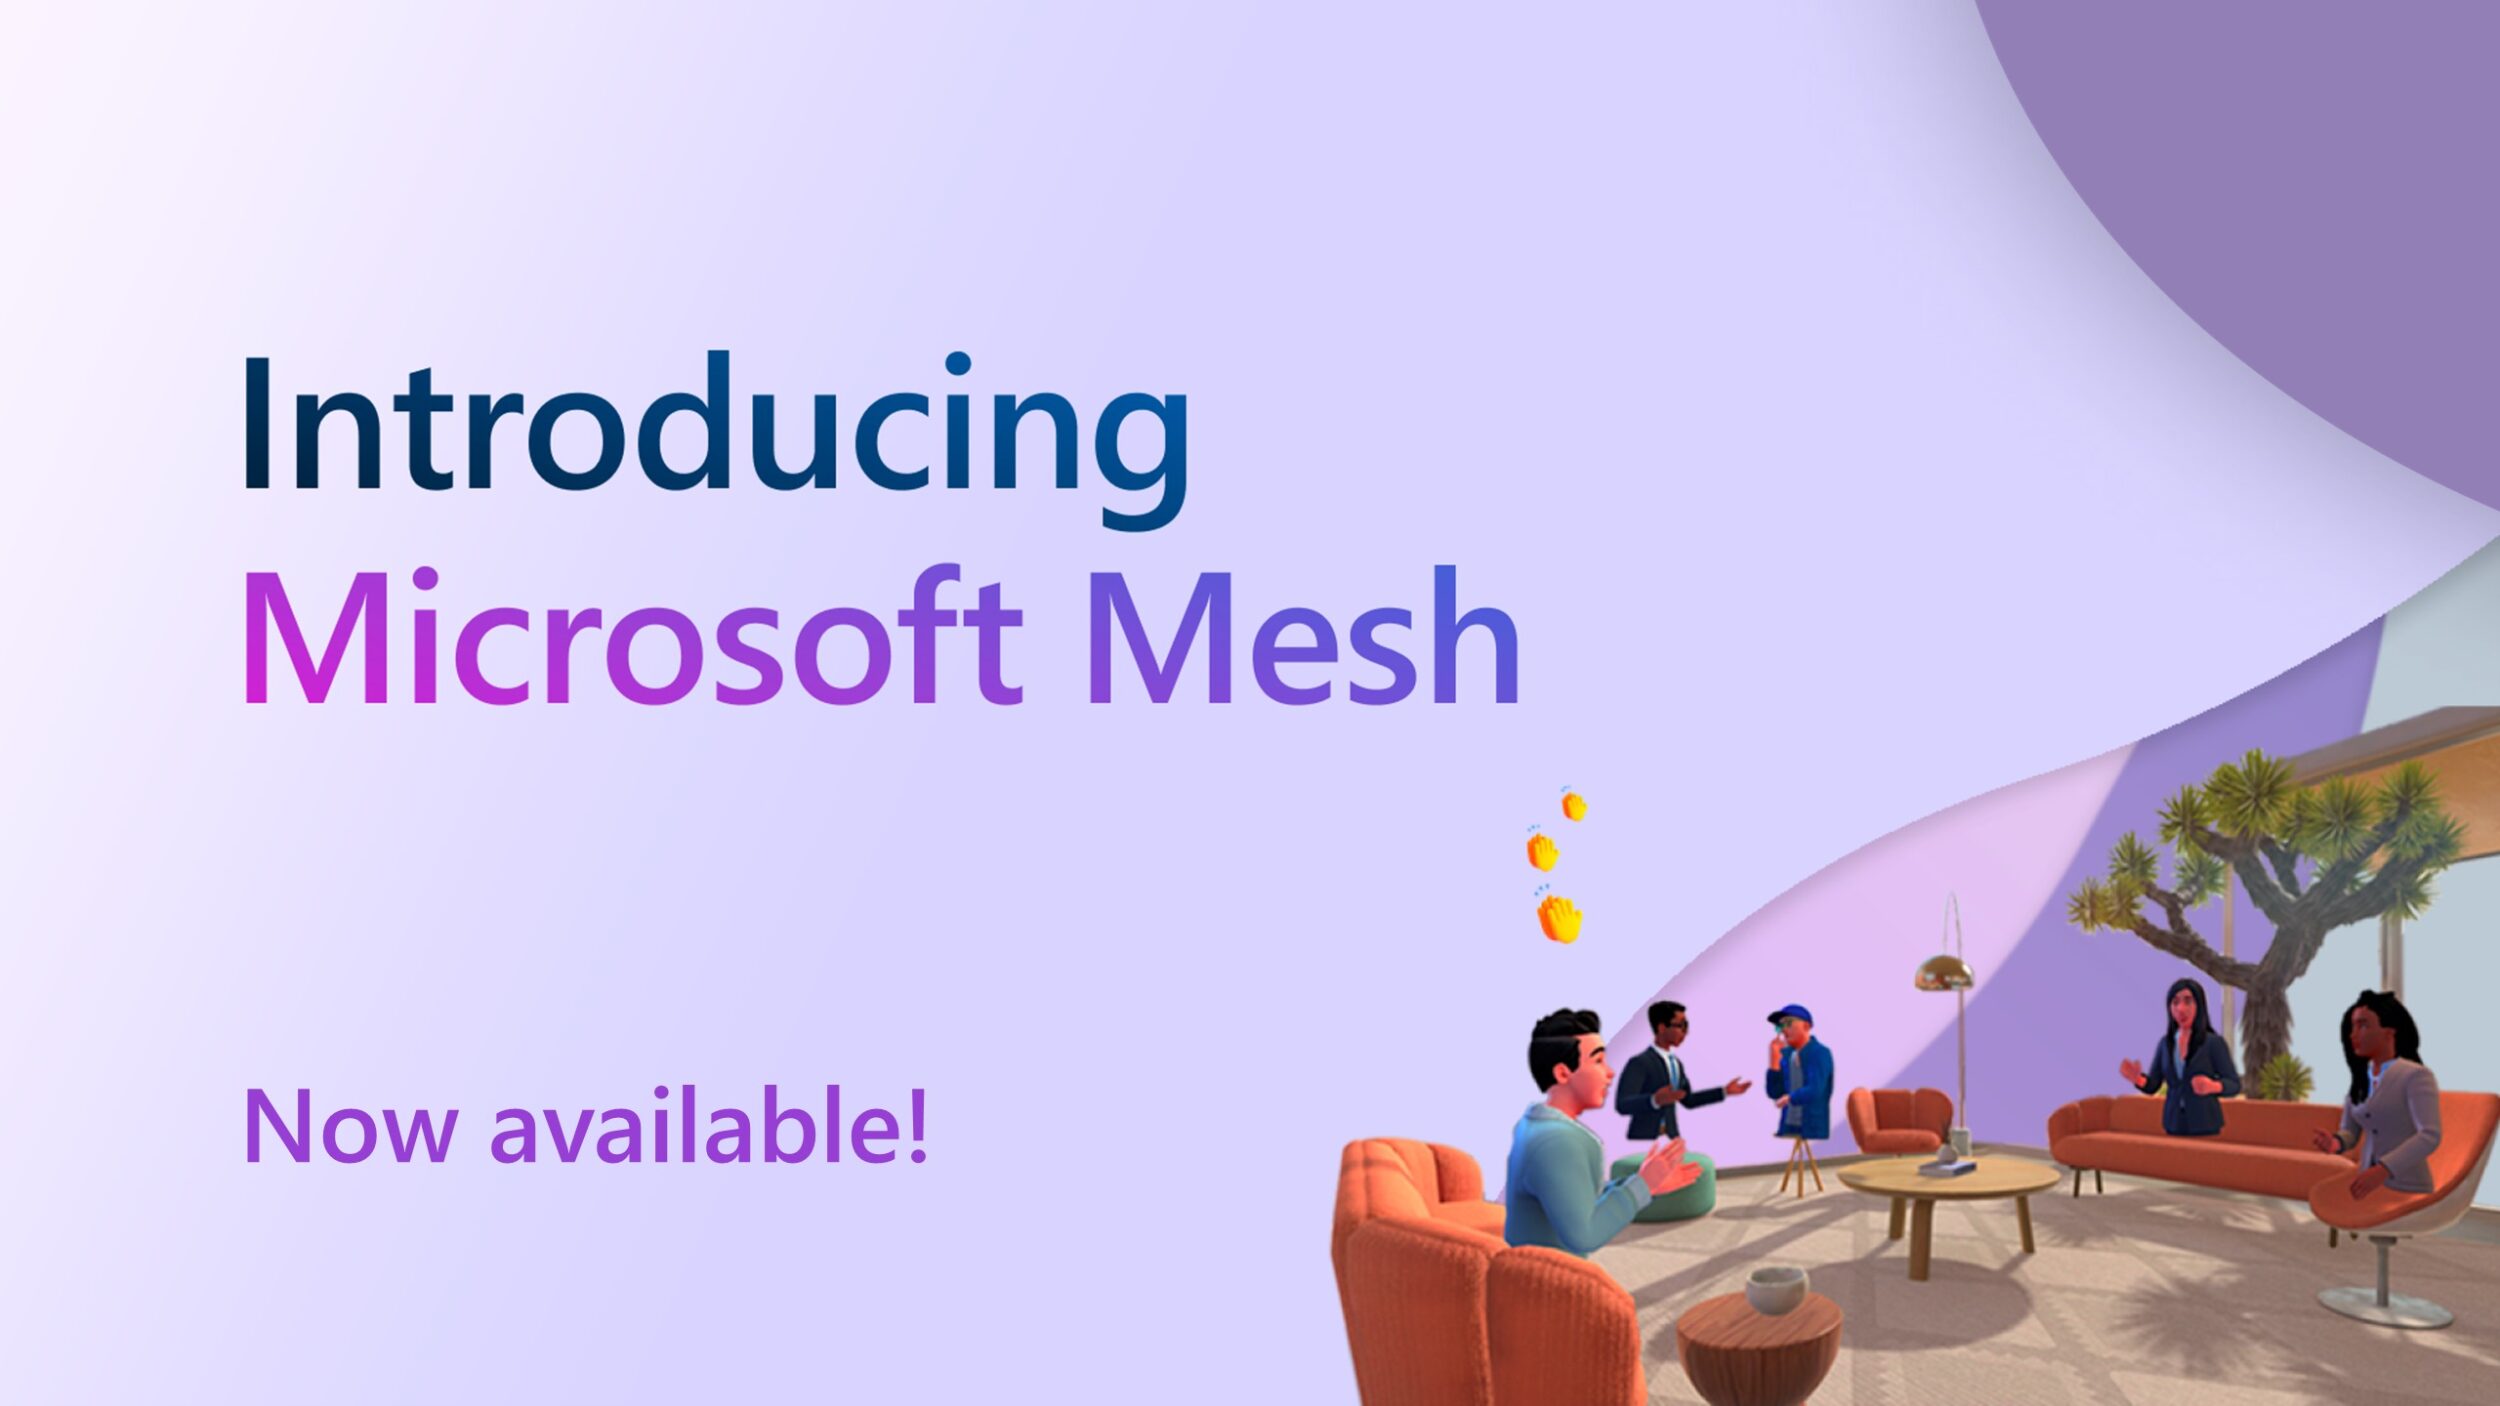 Microsoft Mesh: Now available for creating innovative multi-user 3D experiences for the workplace